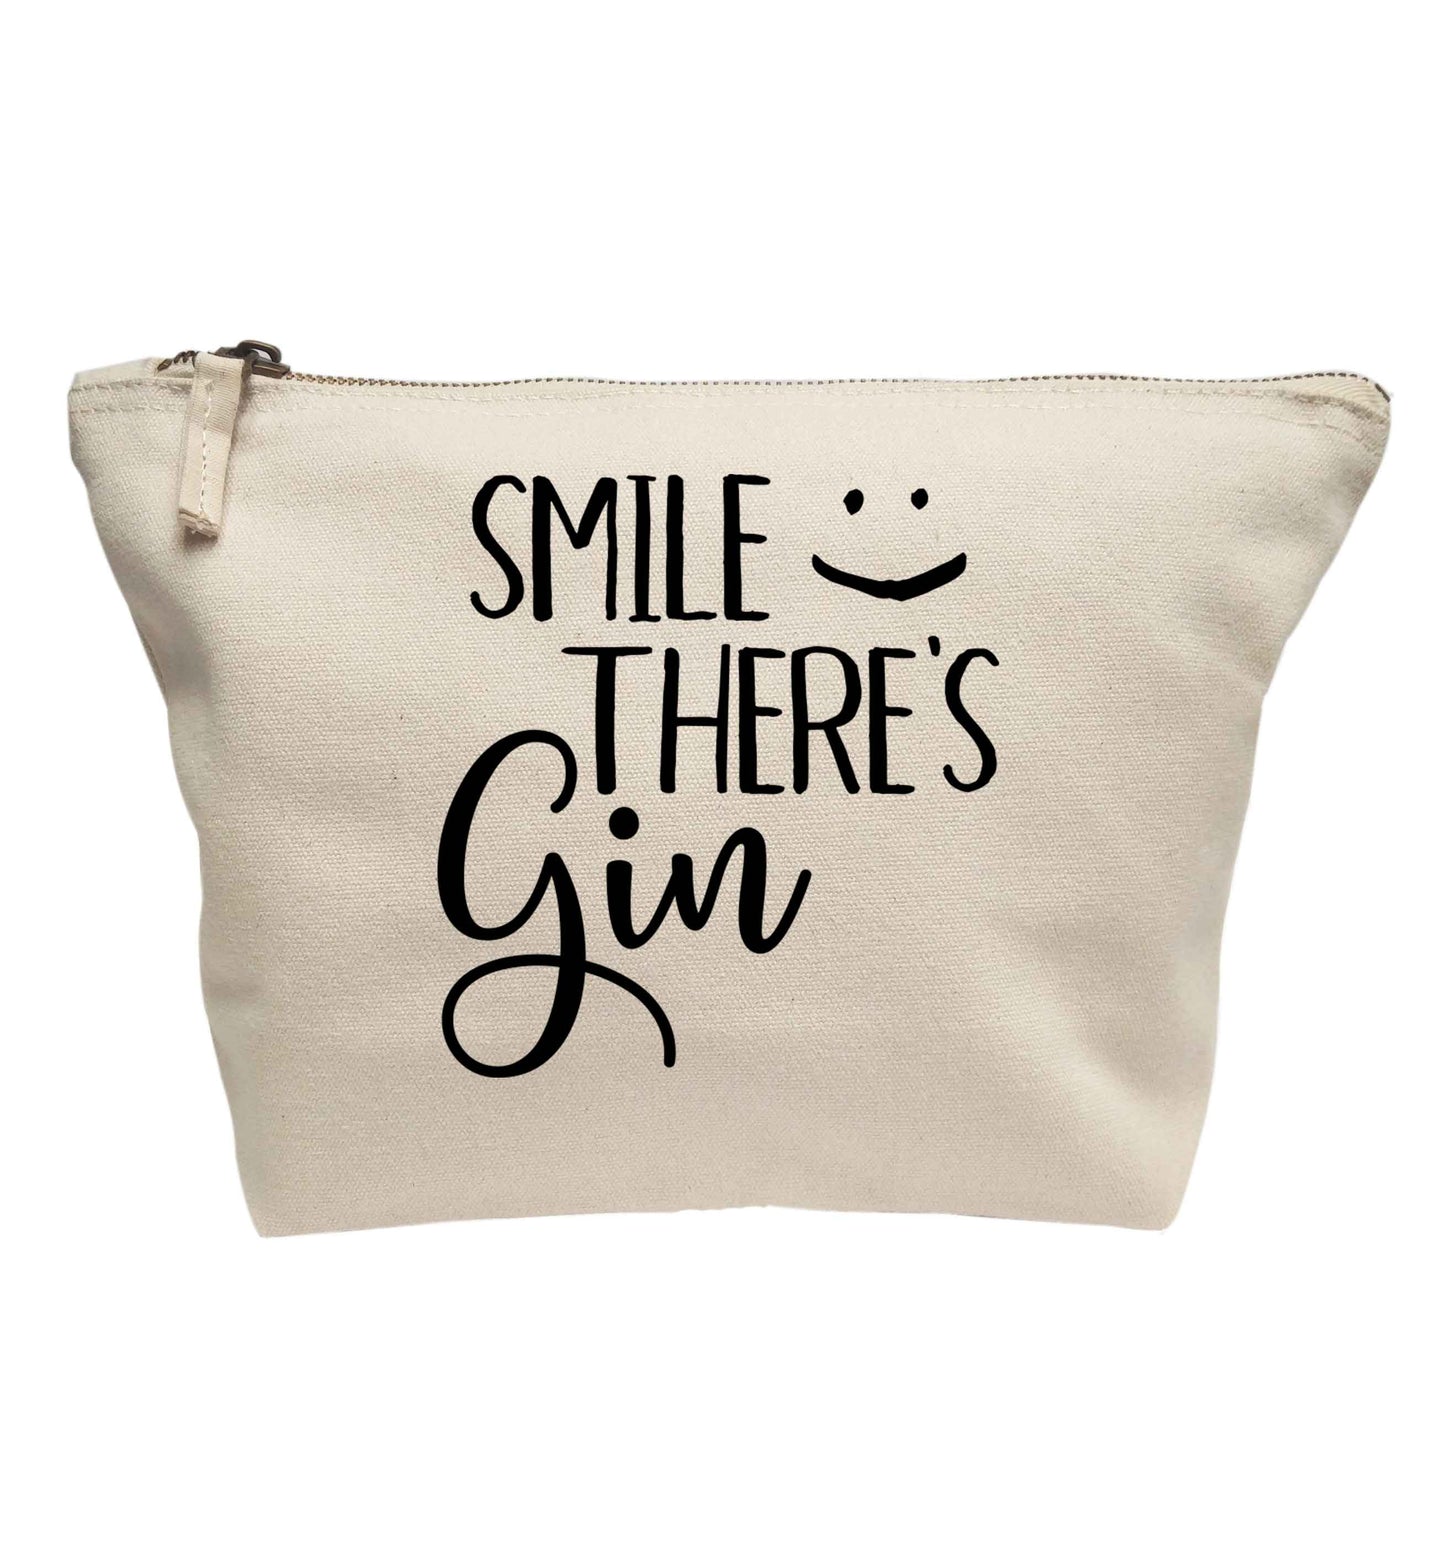 Smile there's gin | makeup / wash bag